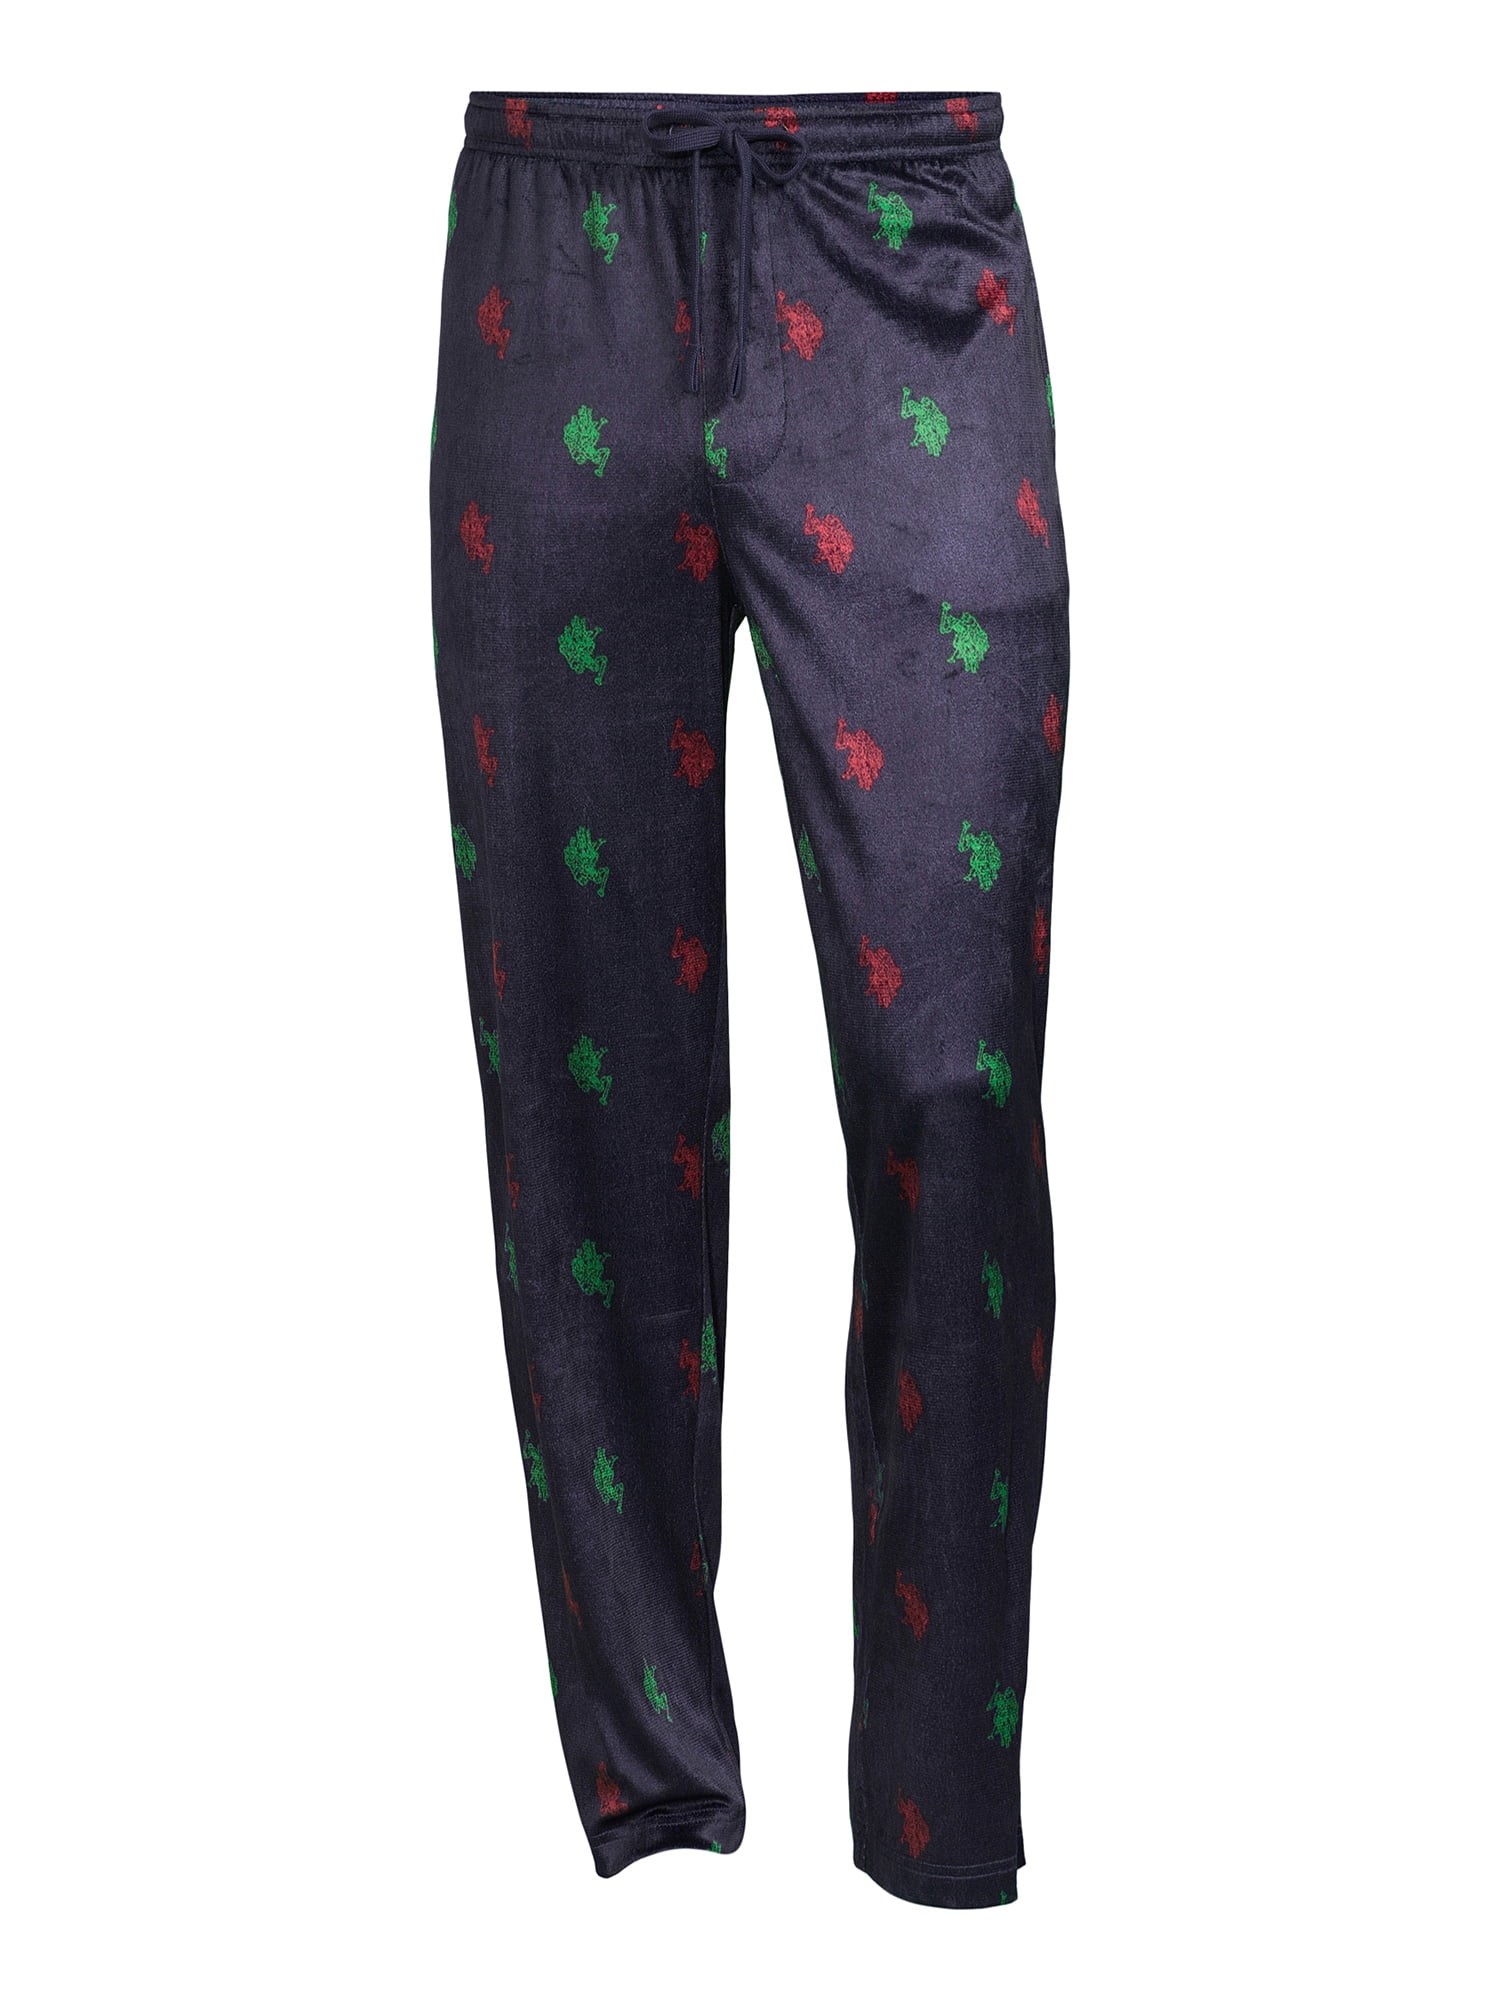 U.S. Polo Assn. Men's Pajama Pants - Lightweight Woven Lounge Pants, Size  Large, Cherry Red at  Men's Clothing store